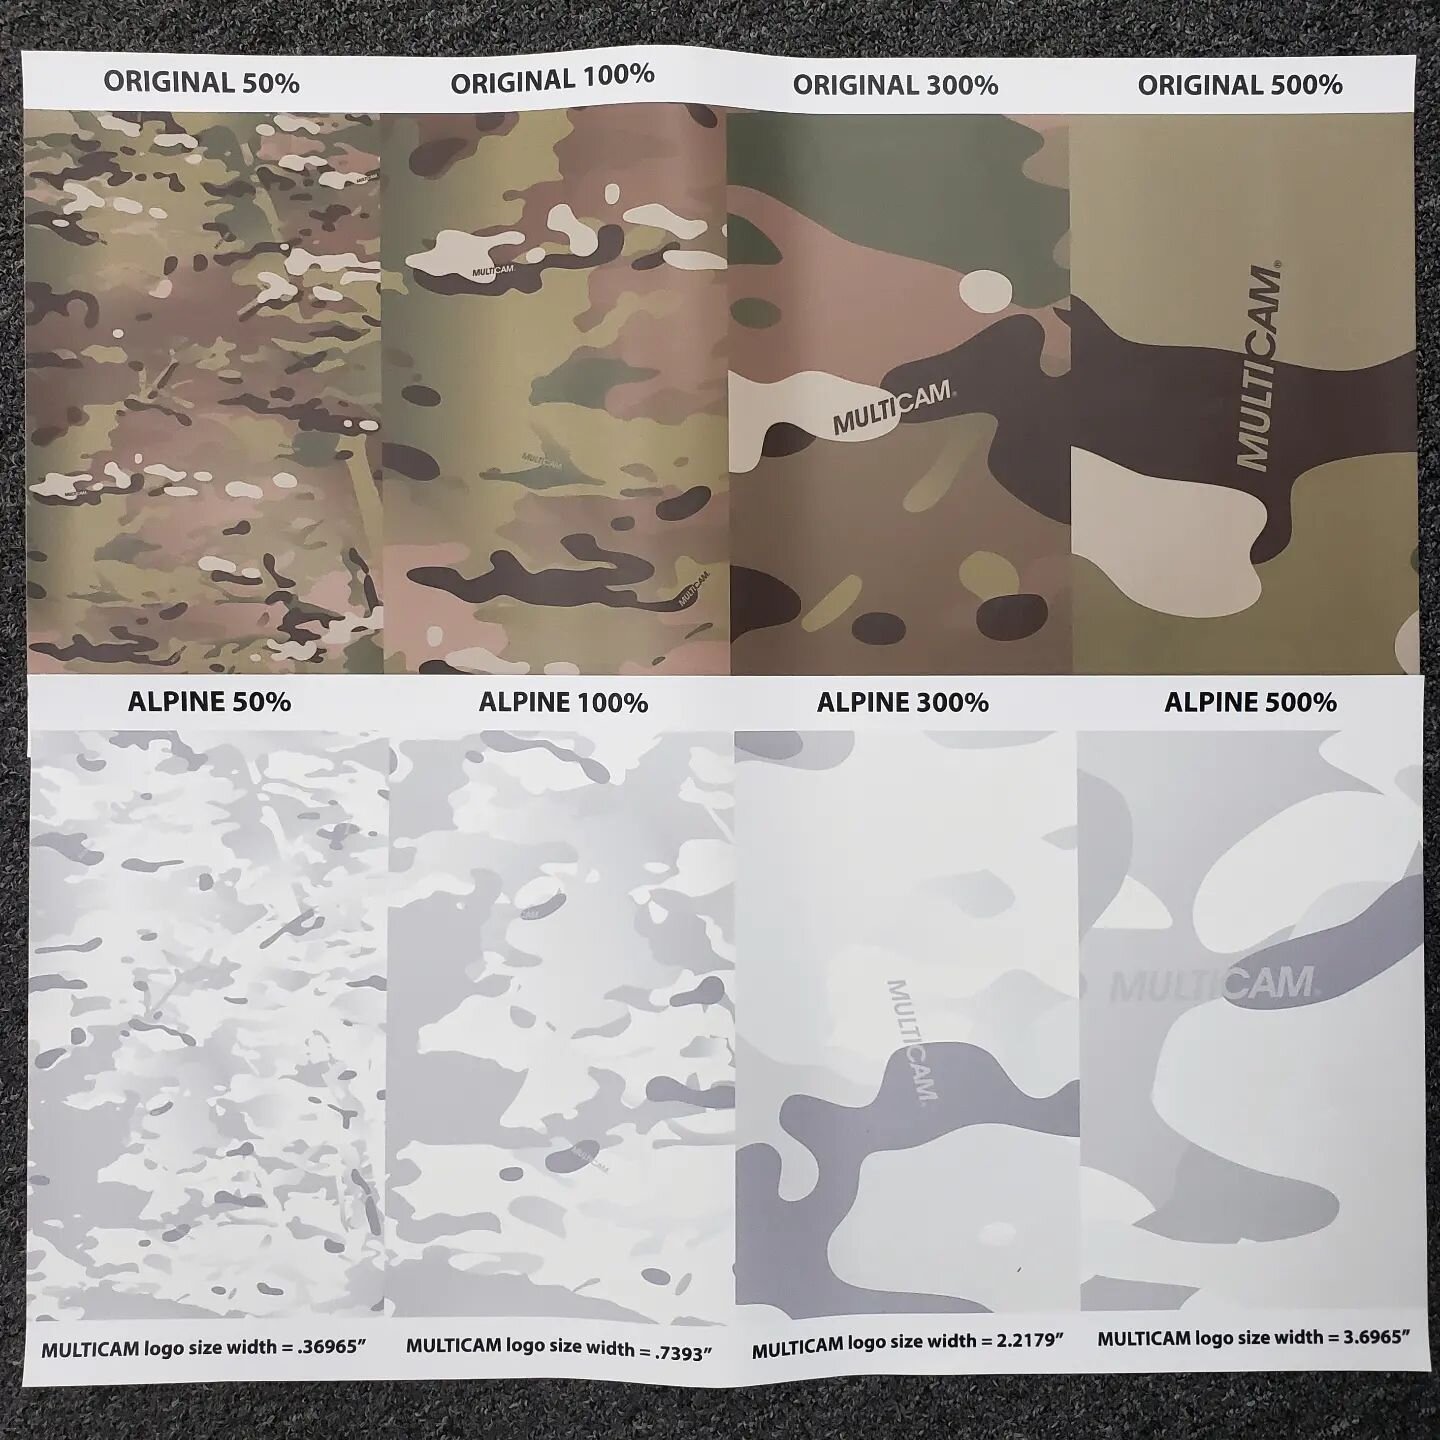 A few folks asked to see a comparison of the four different scales available for the five #MultiCamvinyl patterns. Swipe thru this carousel and see if it helps you get a feel for the size differences between 50%, 100%, 300% and 500%!

(There may or m